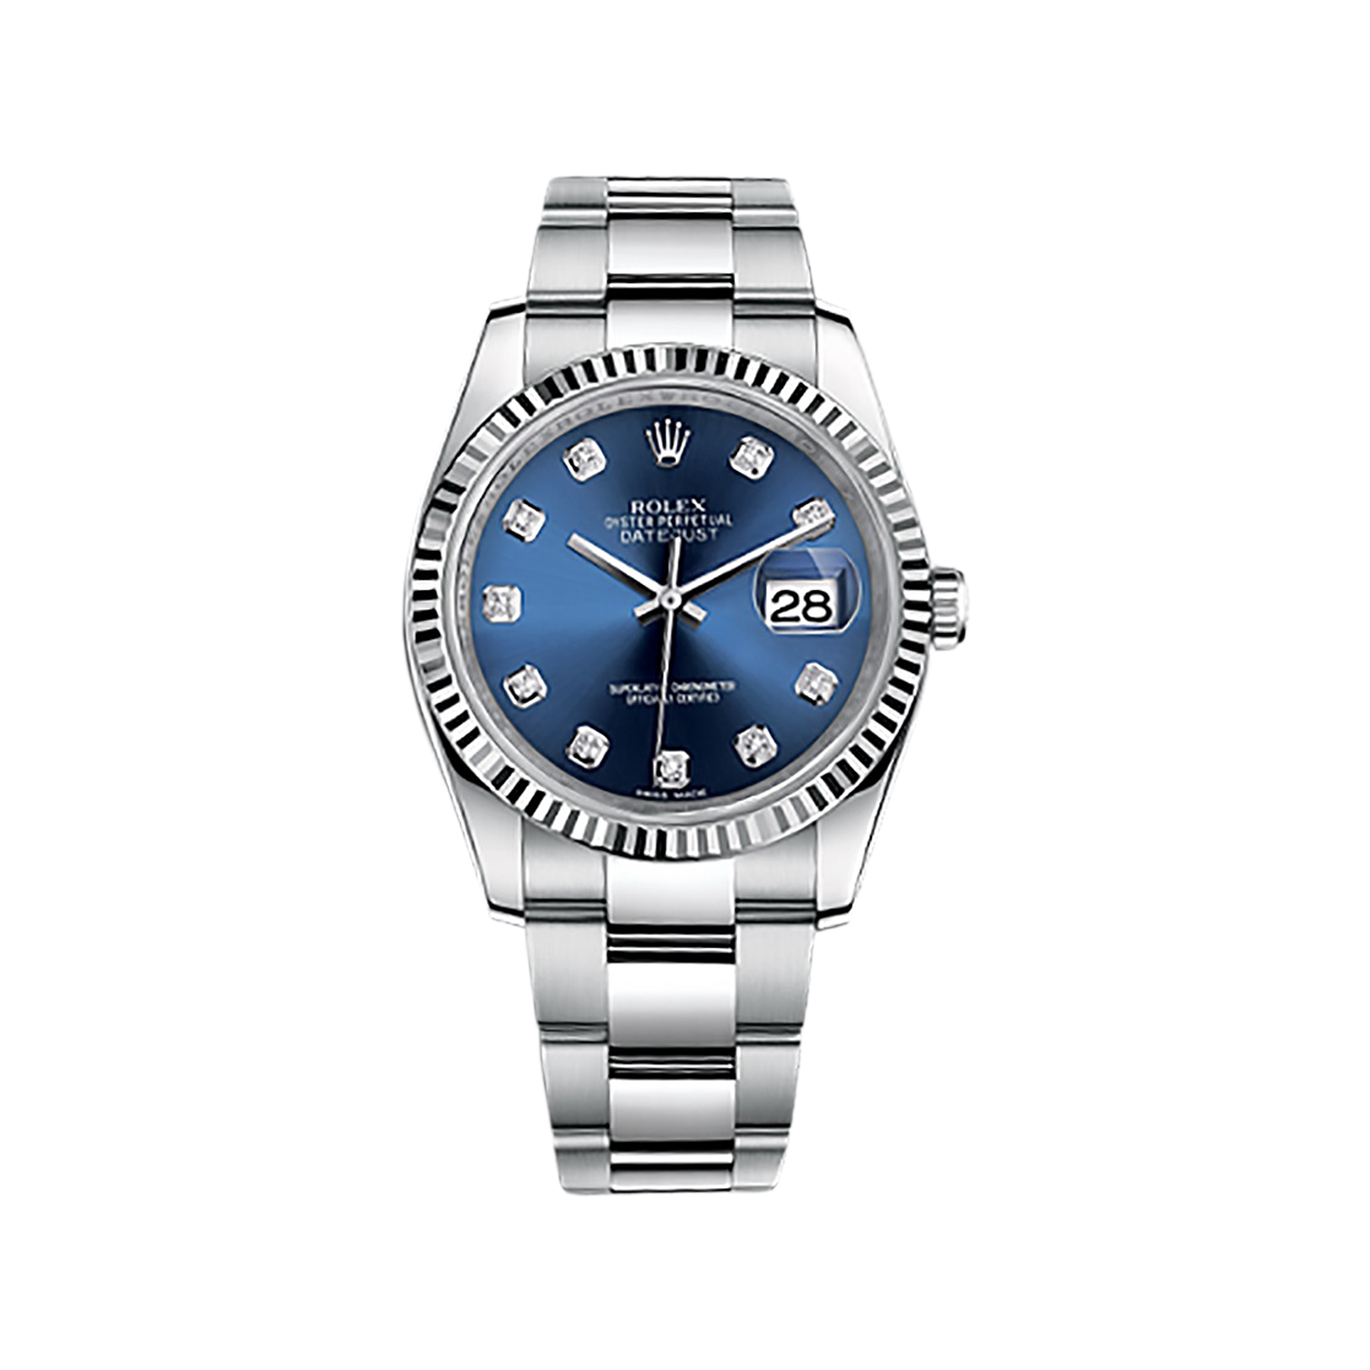 Datejust 36 116234 White Gold & Stainless Steel Watch (Blue Set with Diamonds)